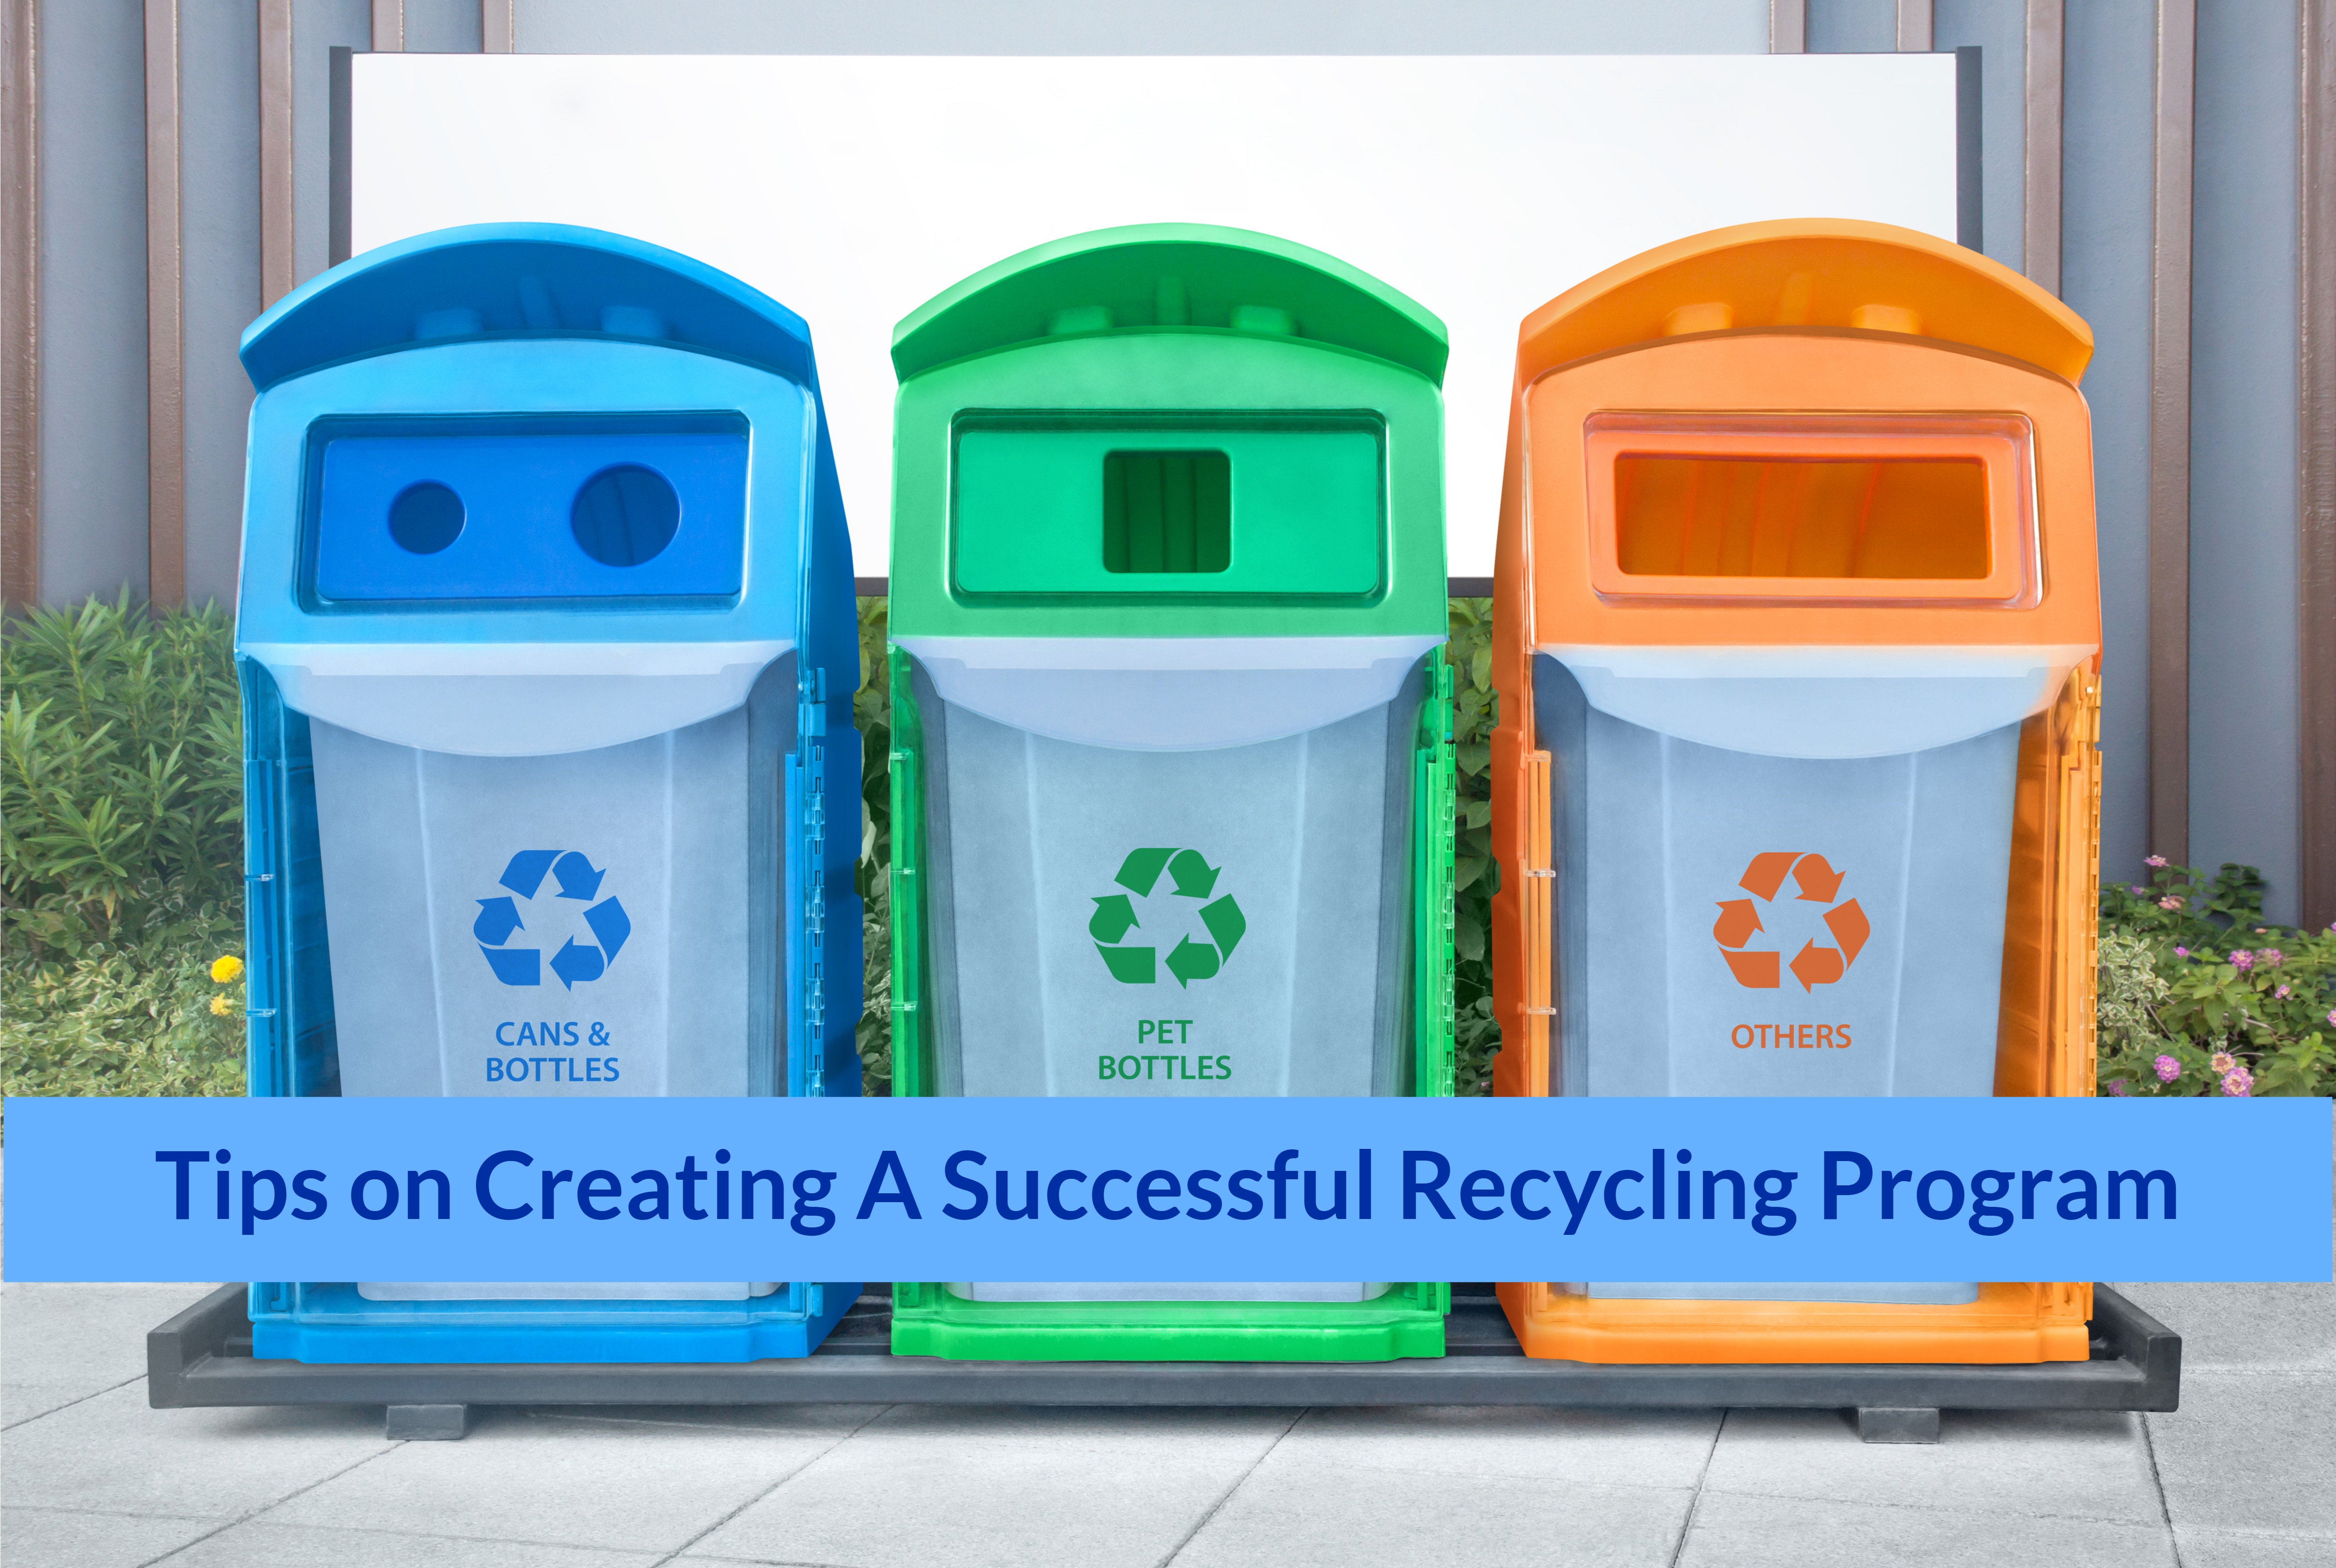 7 Steps to Develop an Effective Recycling Program - IFMA Knowledge Library